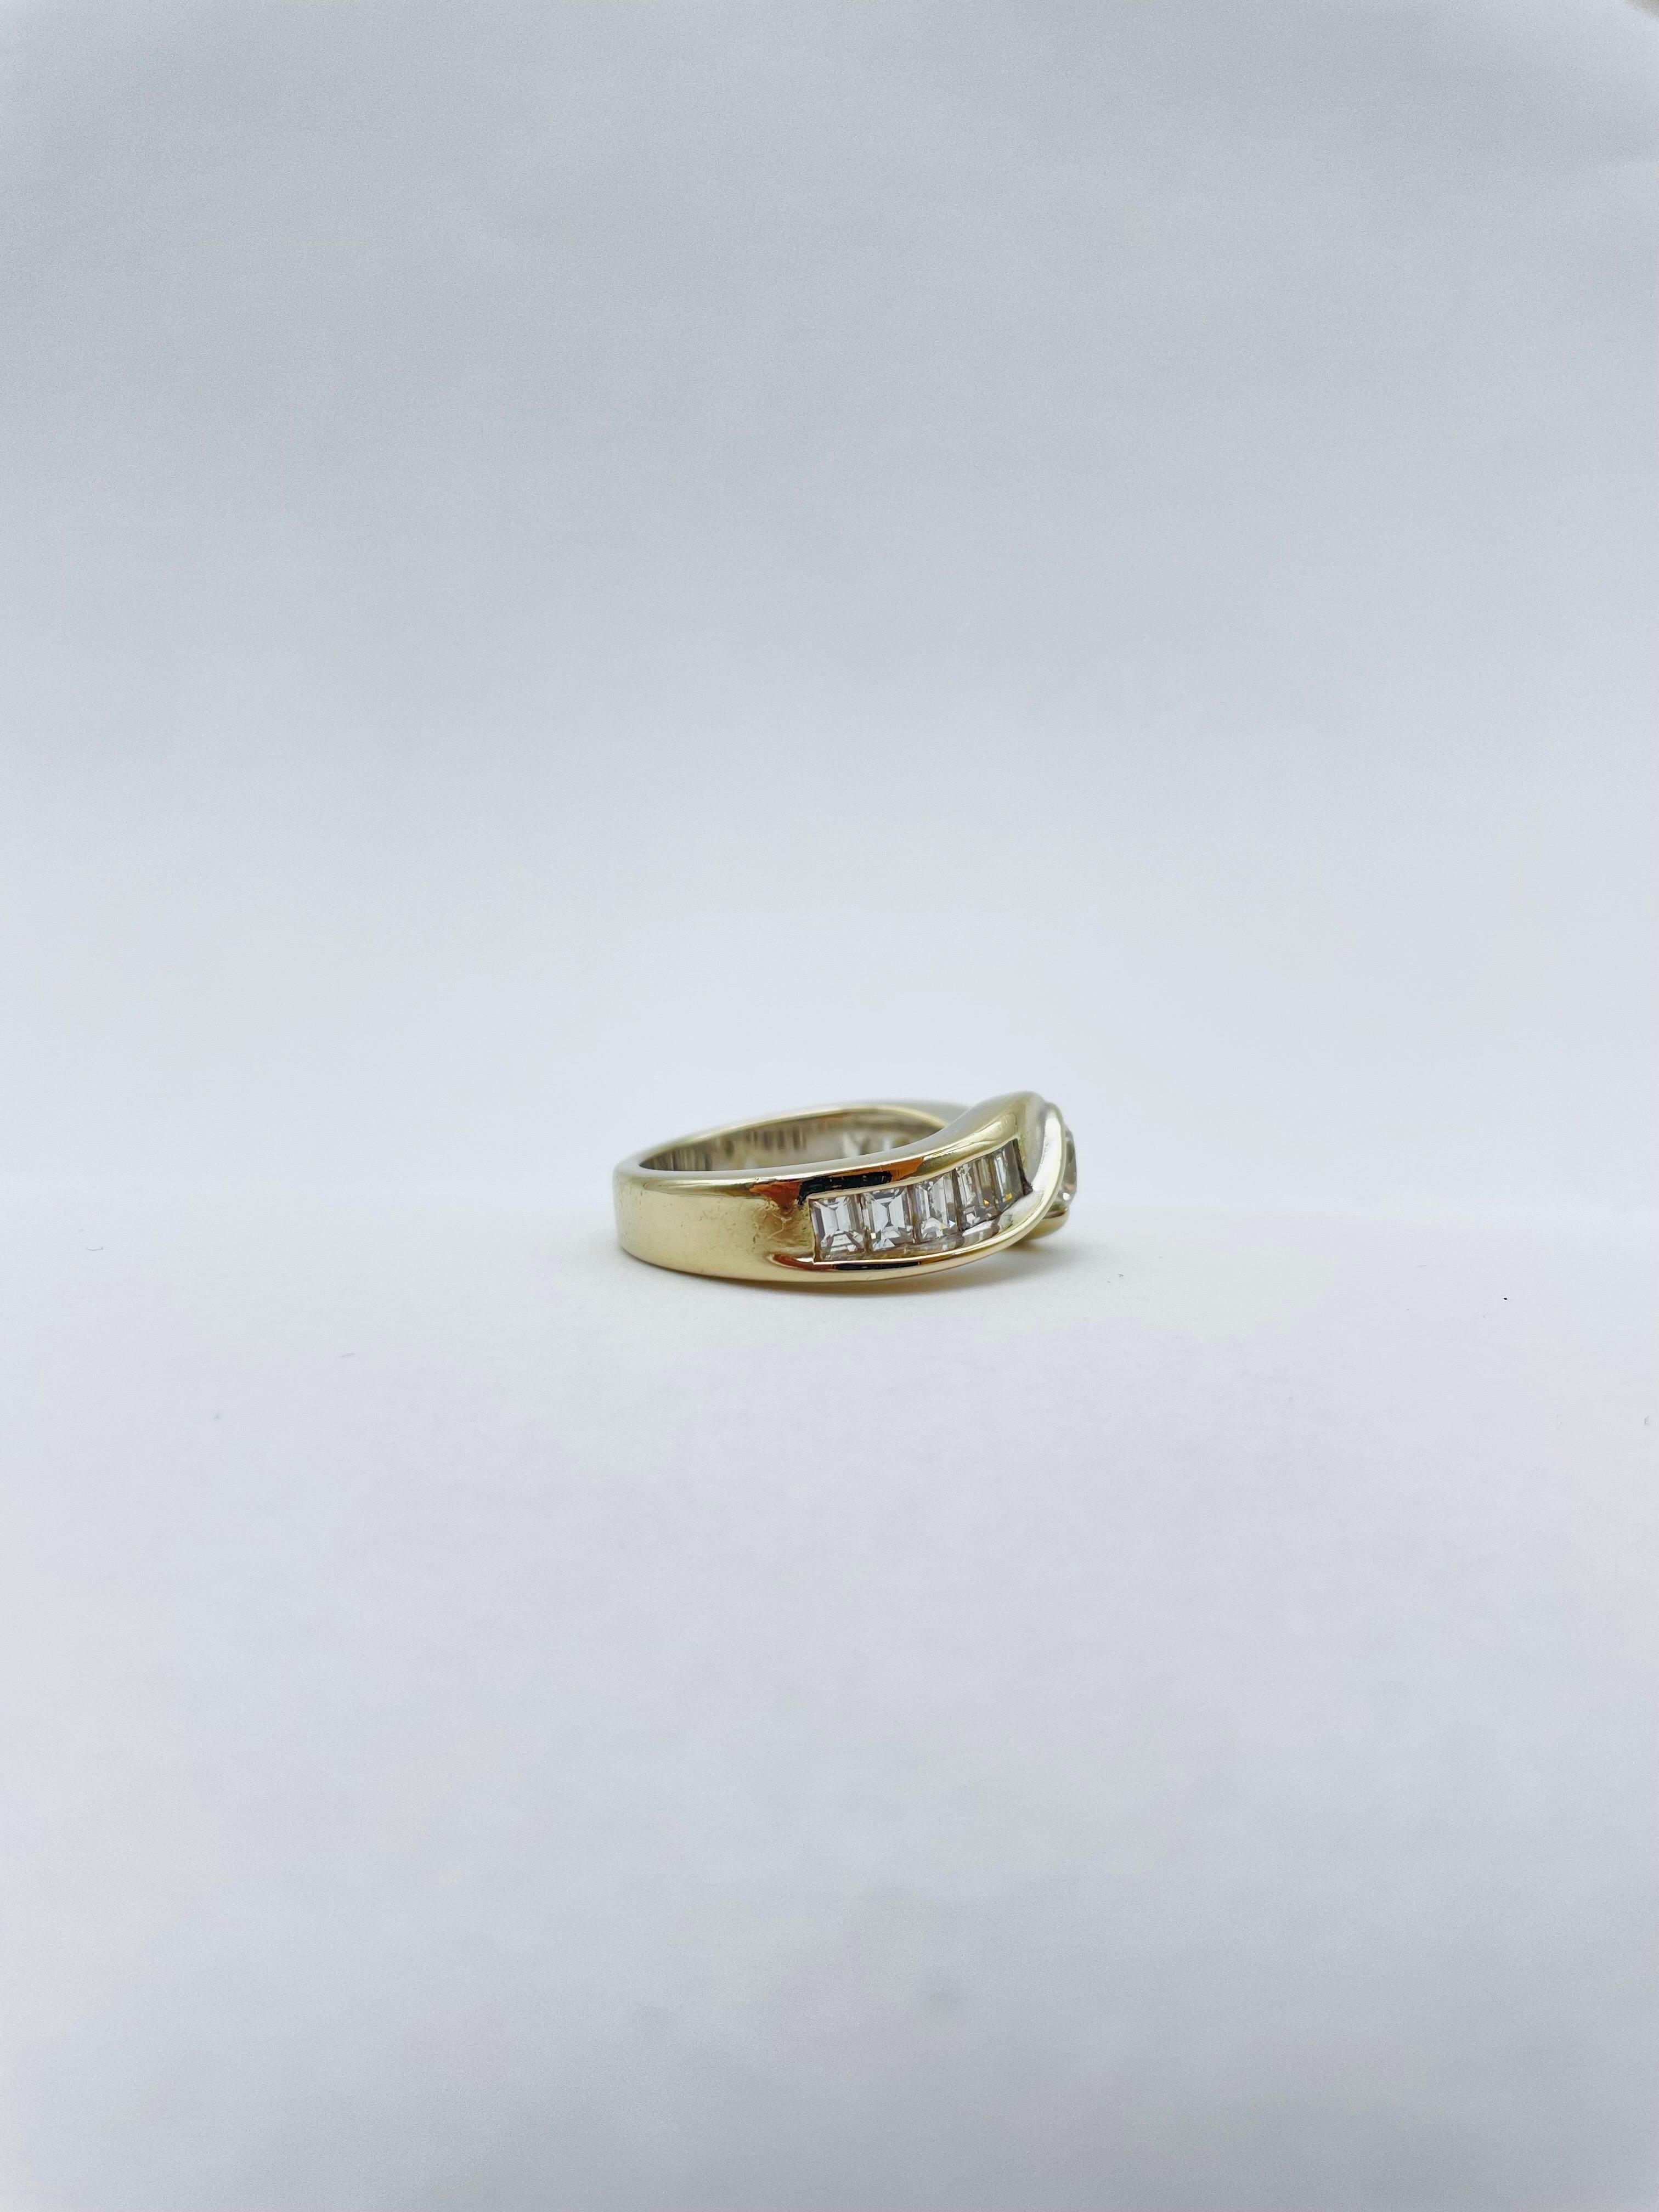 Unique 18k Gold Ring, 0.50 Carat Diamond and 8 Baguette, White/Yellow Gold For Sale 5